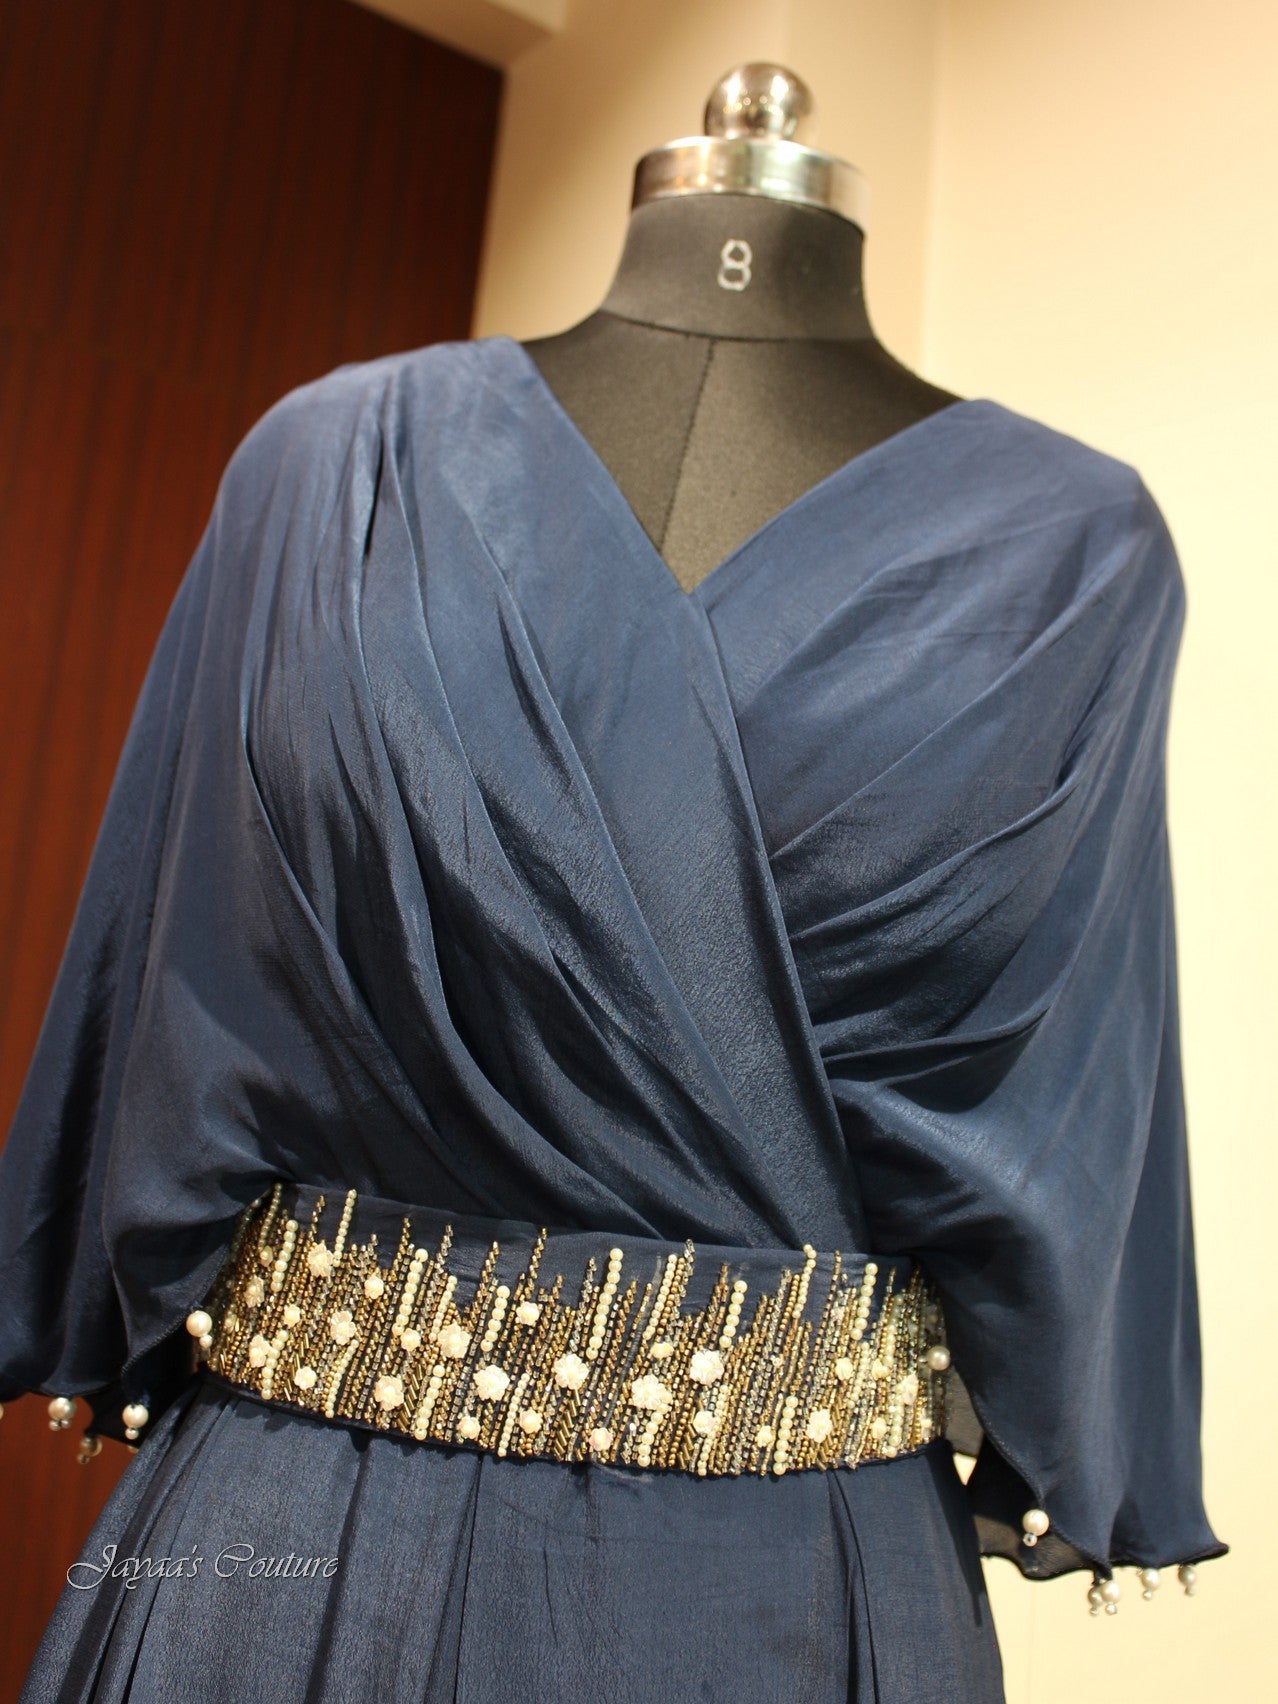 Midnight Blue gown with belt